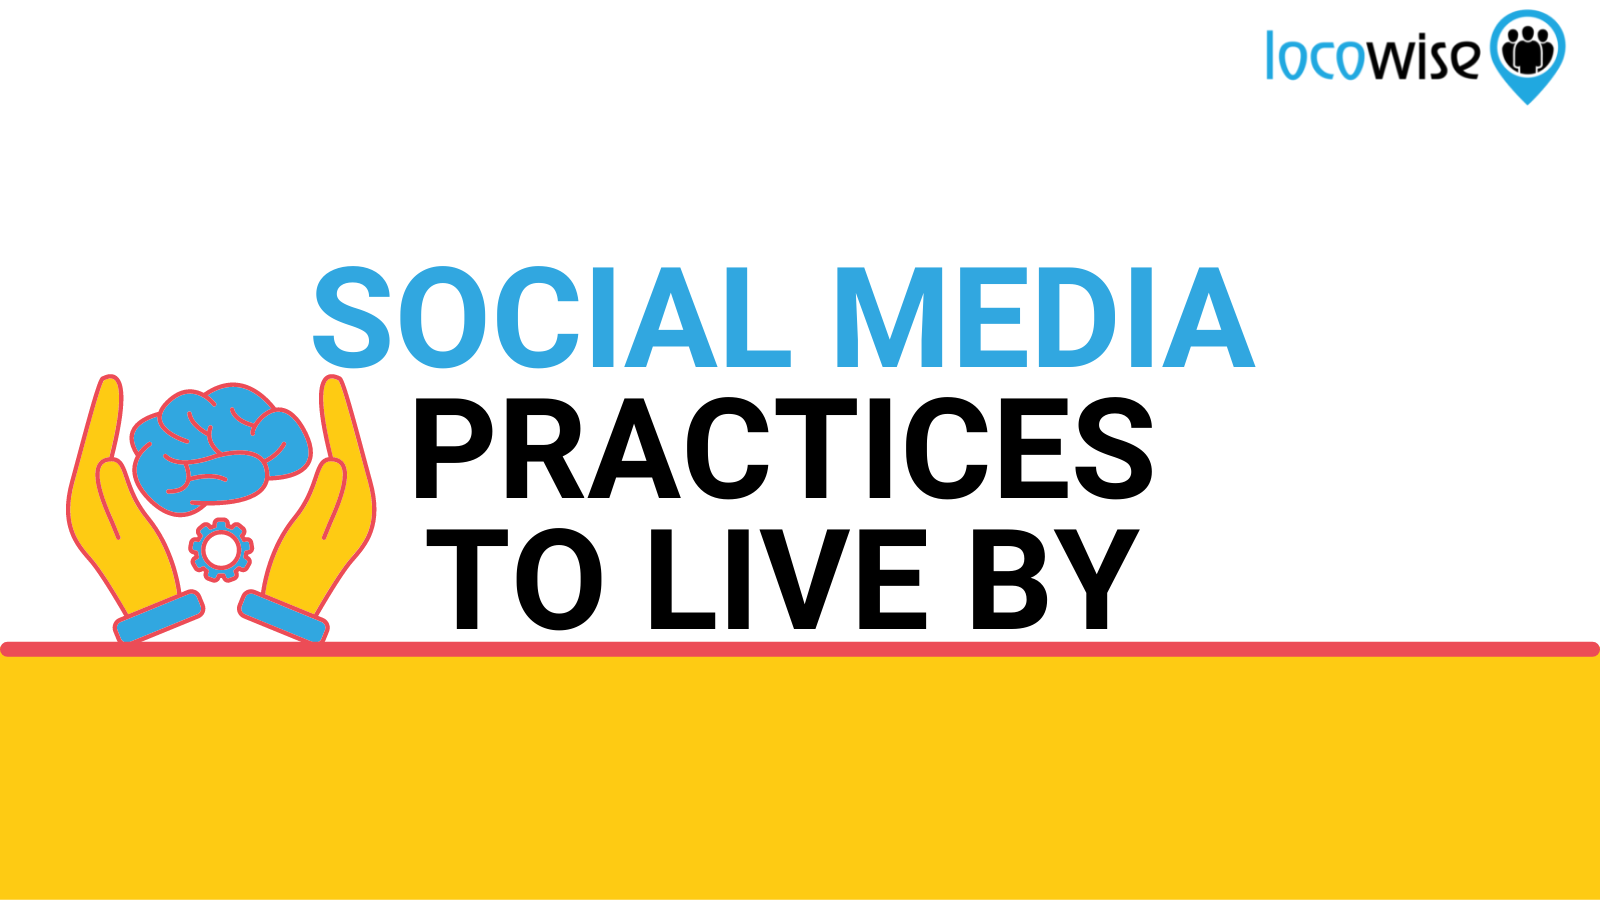 Social Media Practices to Live By